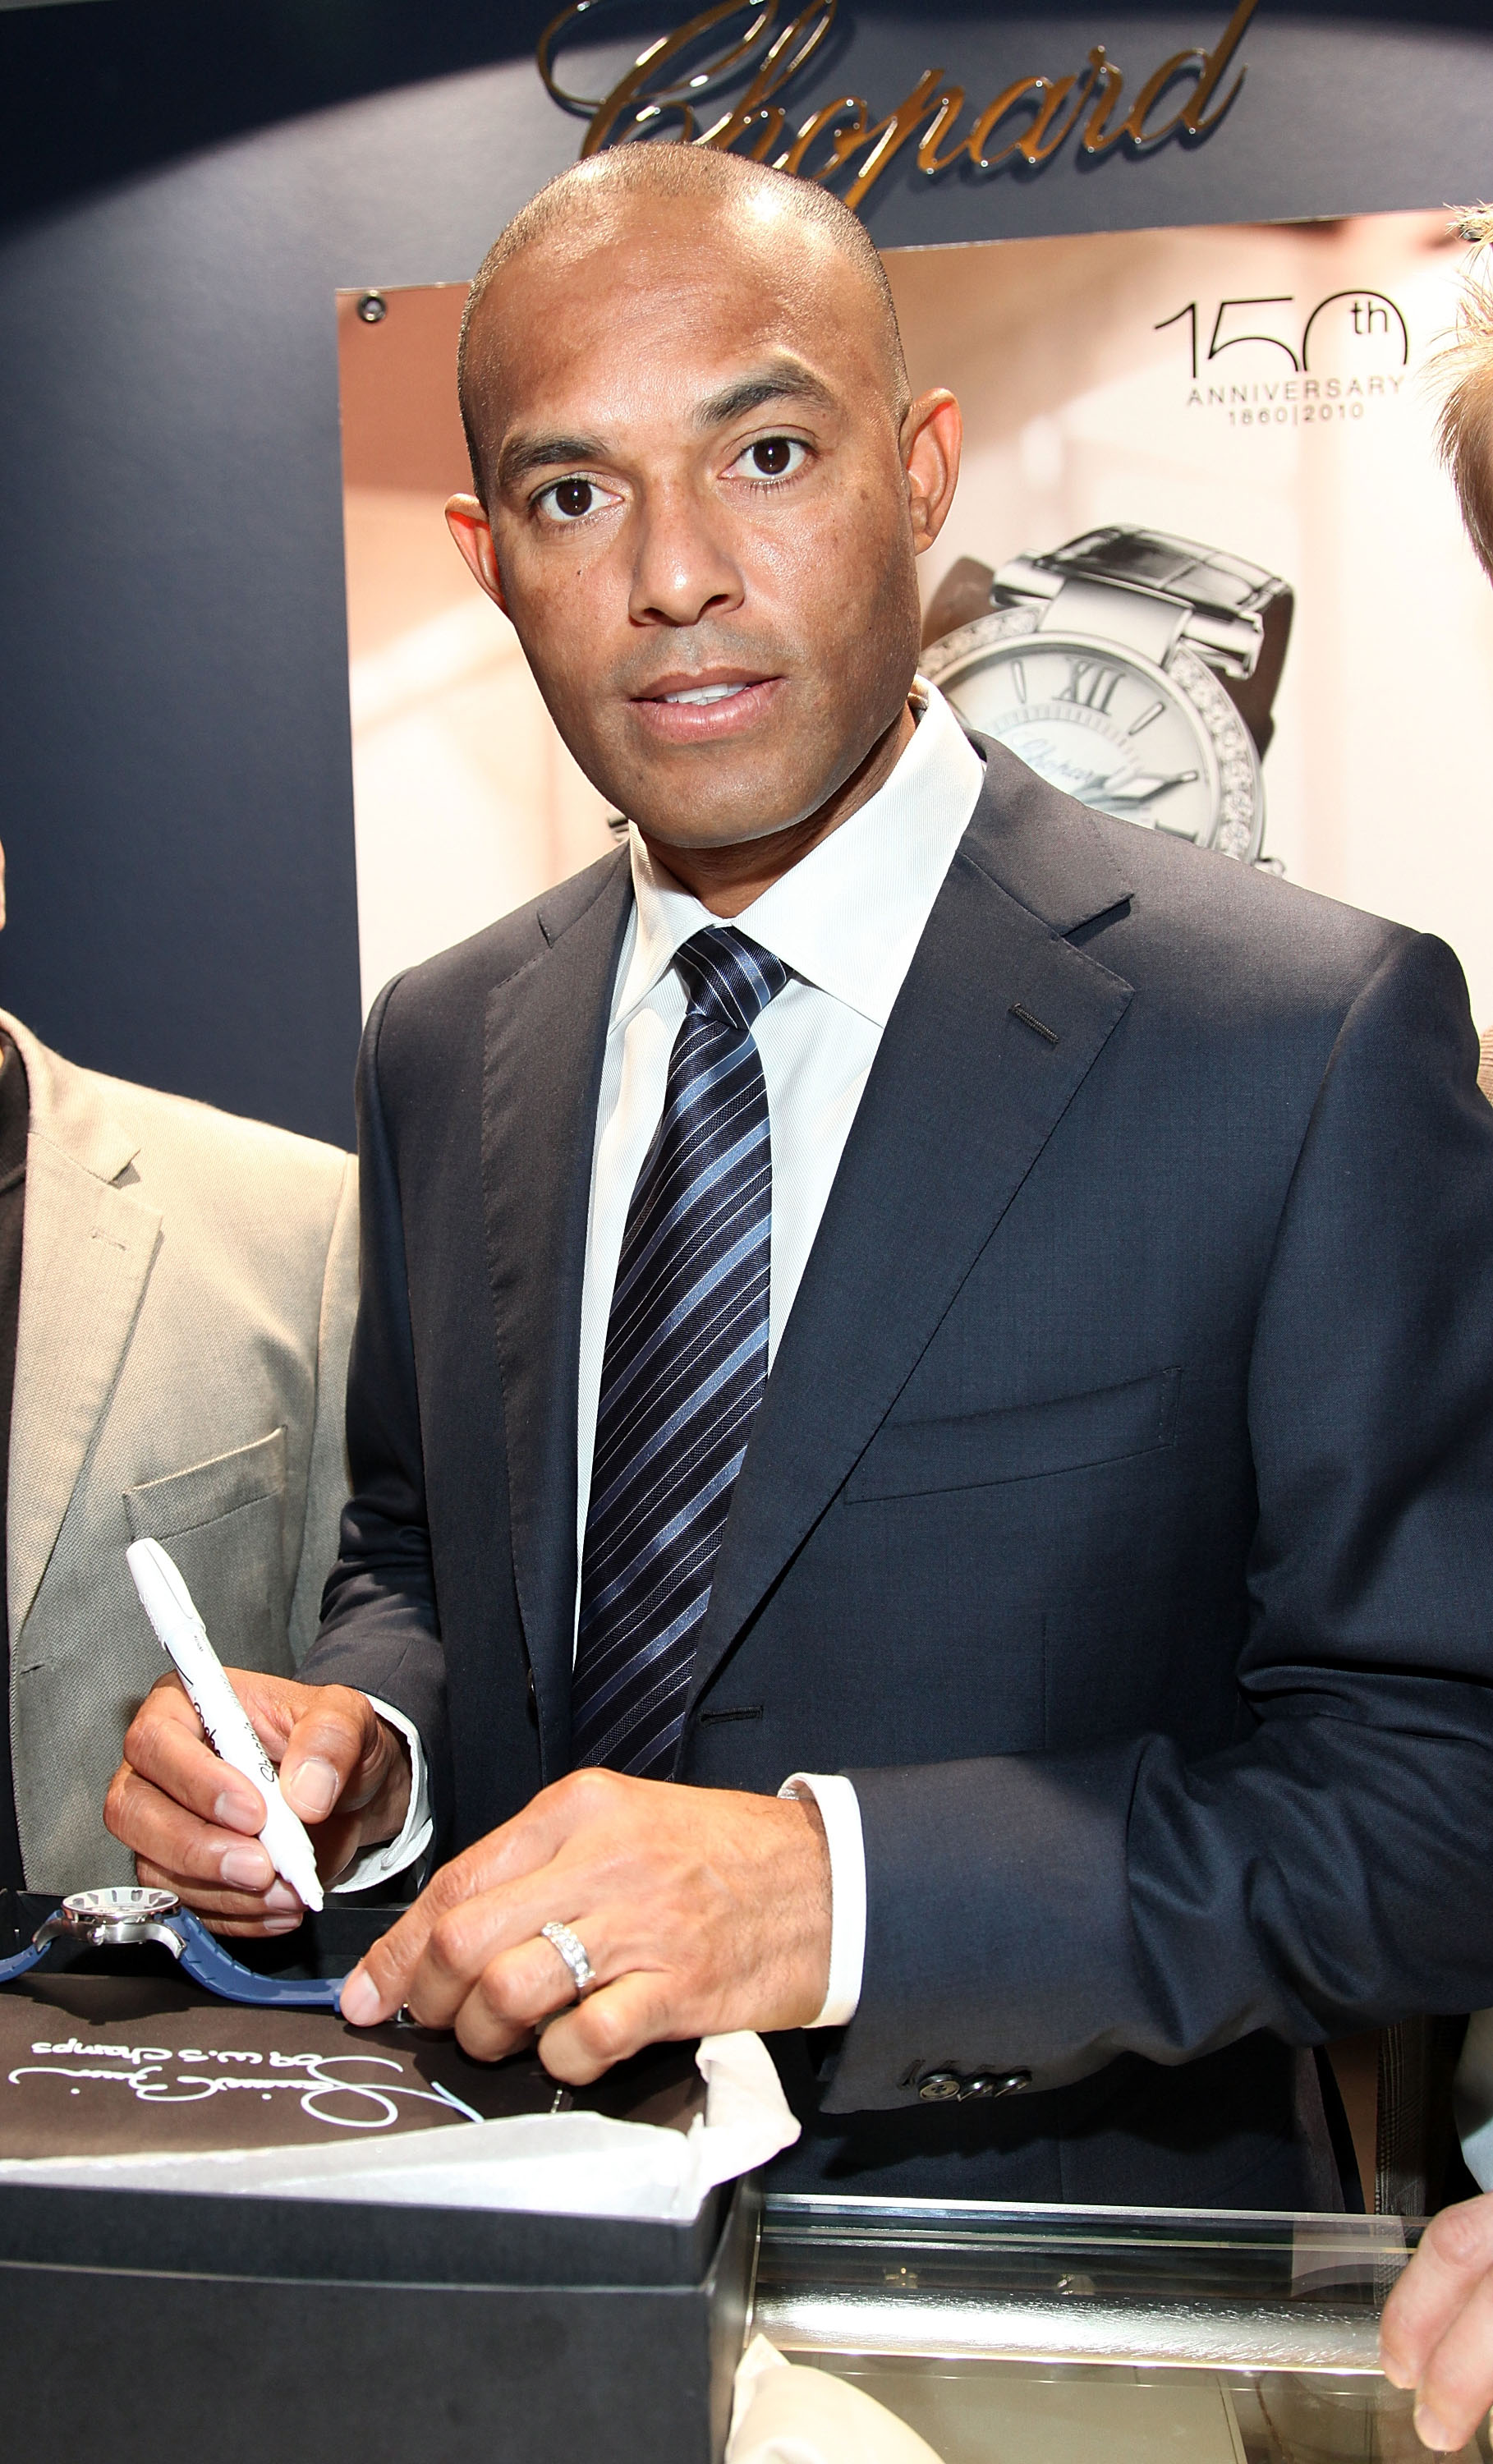 GREENWICH, CT - NOVEMBER 12:  Major League Baseball Players, Including New York Yankees Closer Mariano Rivera Make Appearance at Manfredi Jewels on November 12, 2010 in Greenwich, Connecticut.  (Photo by Donald Bowers/Getty Images for Manfredi Jewels)